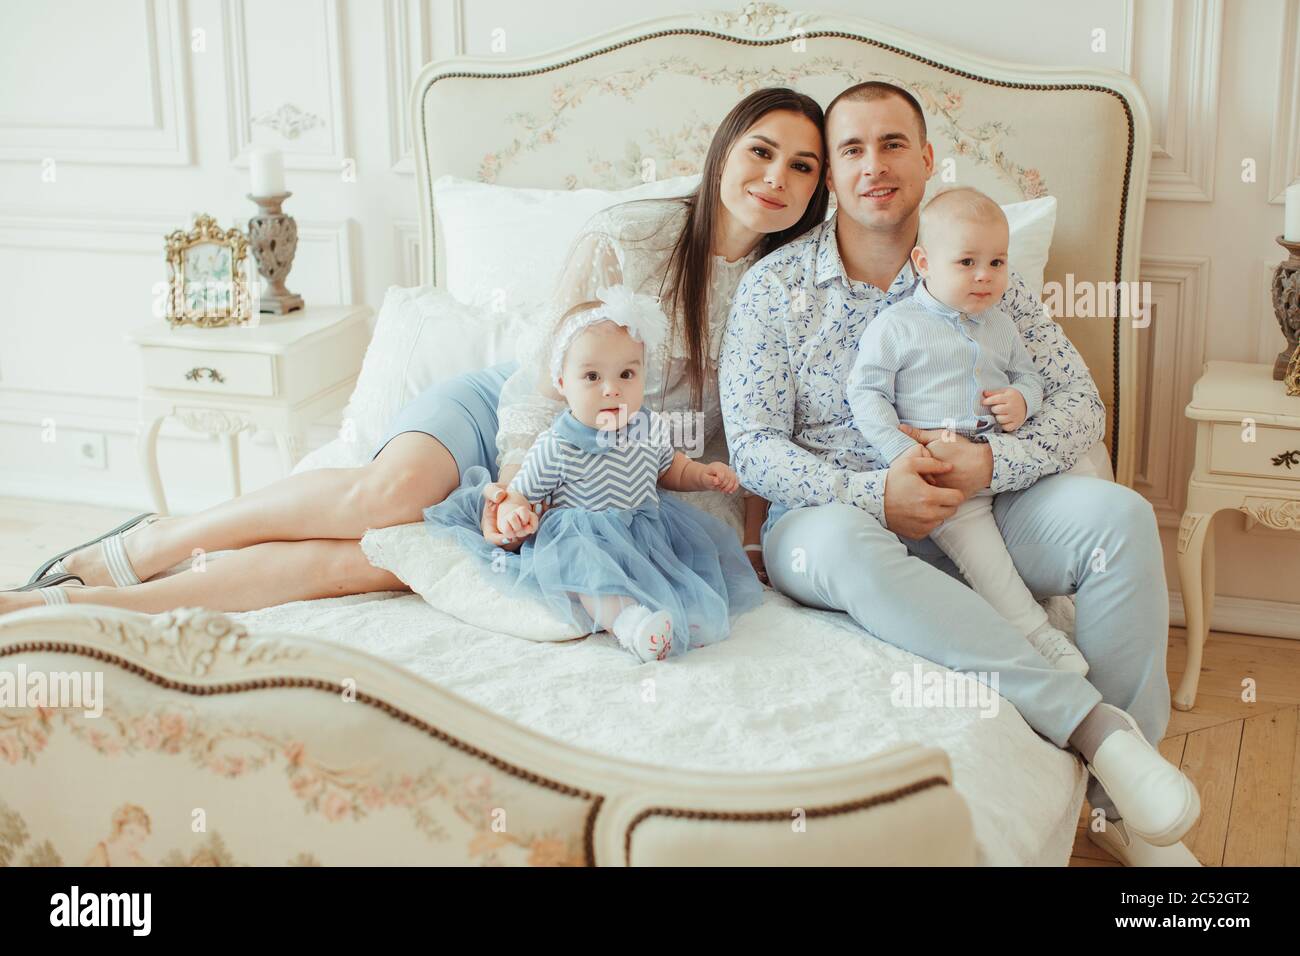 Portrait of a family sitting on a bed Stock Photo